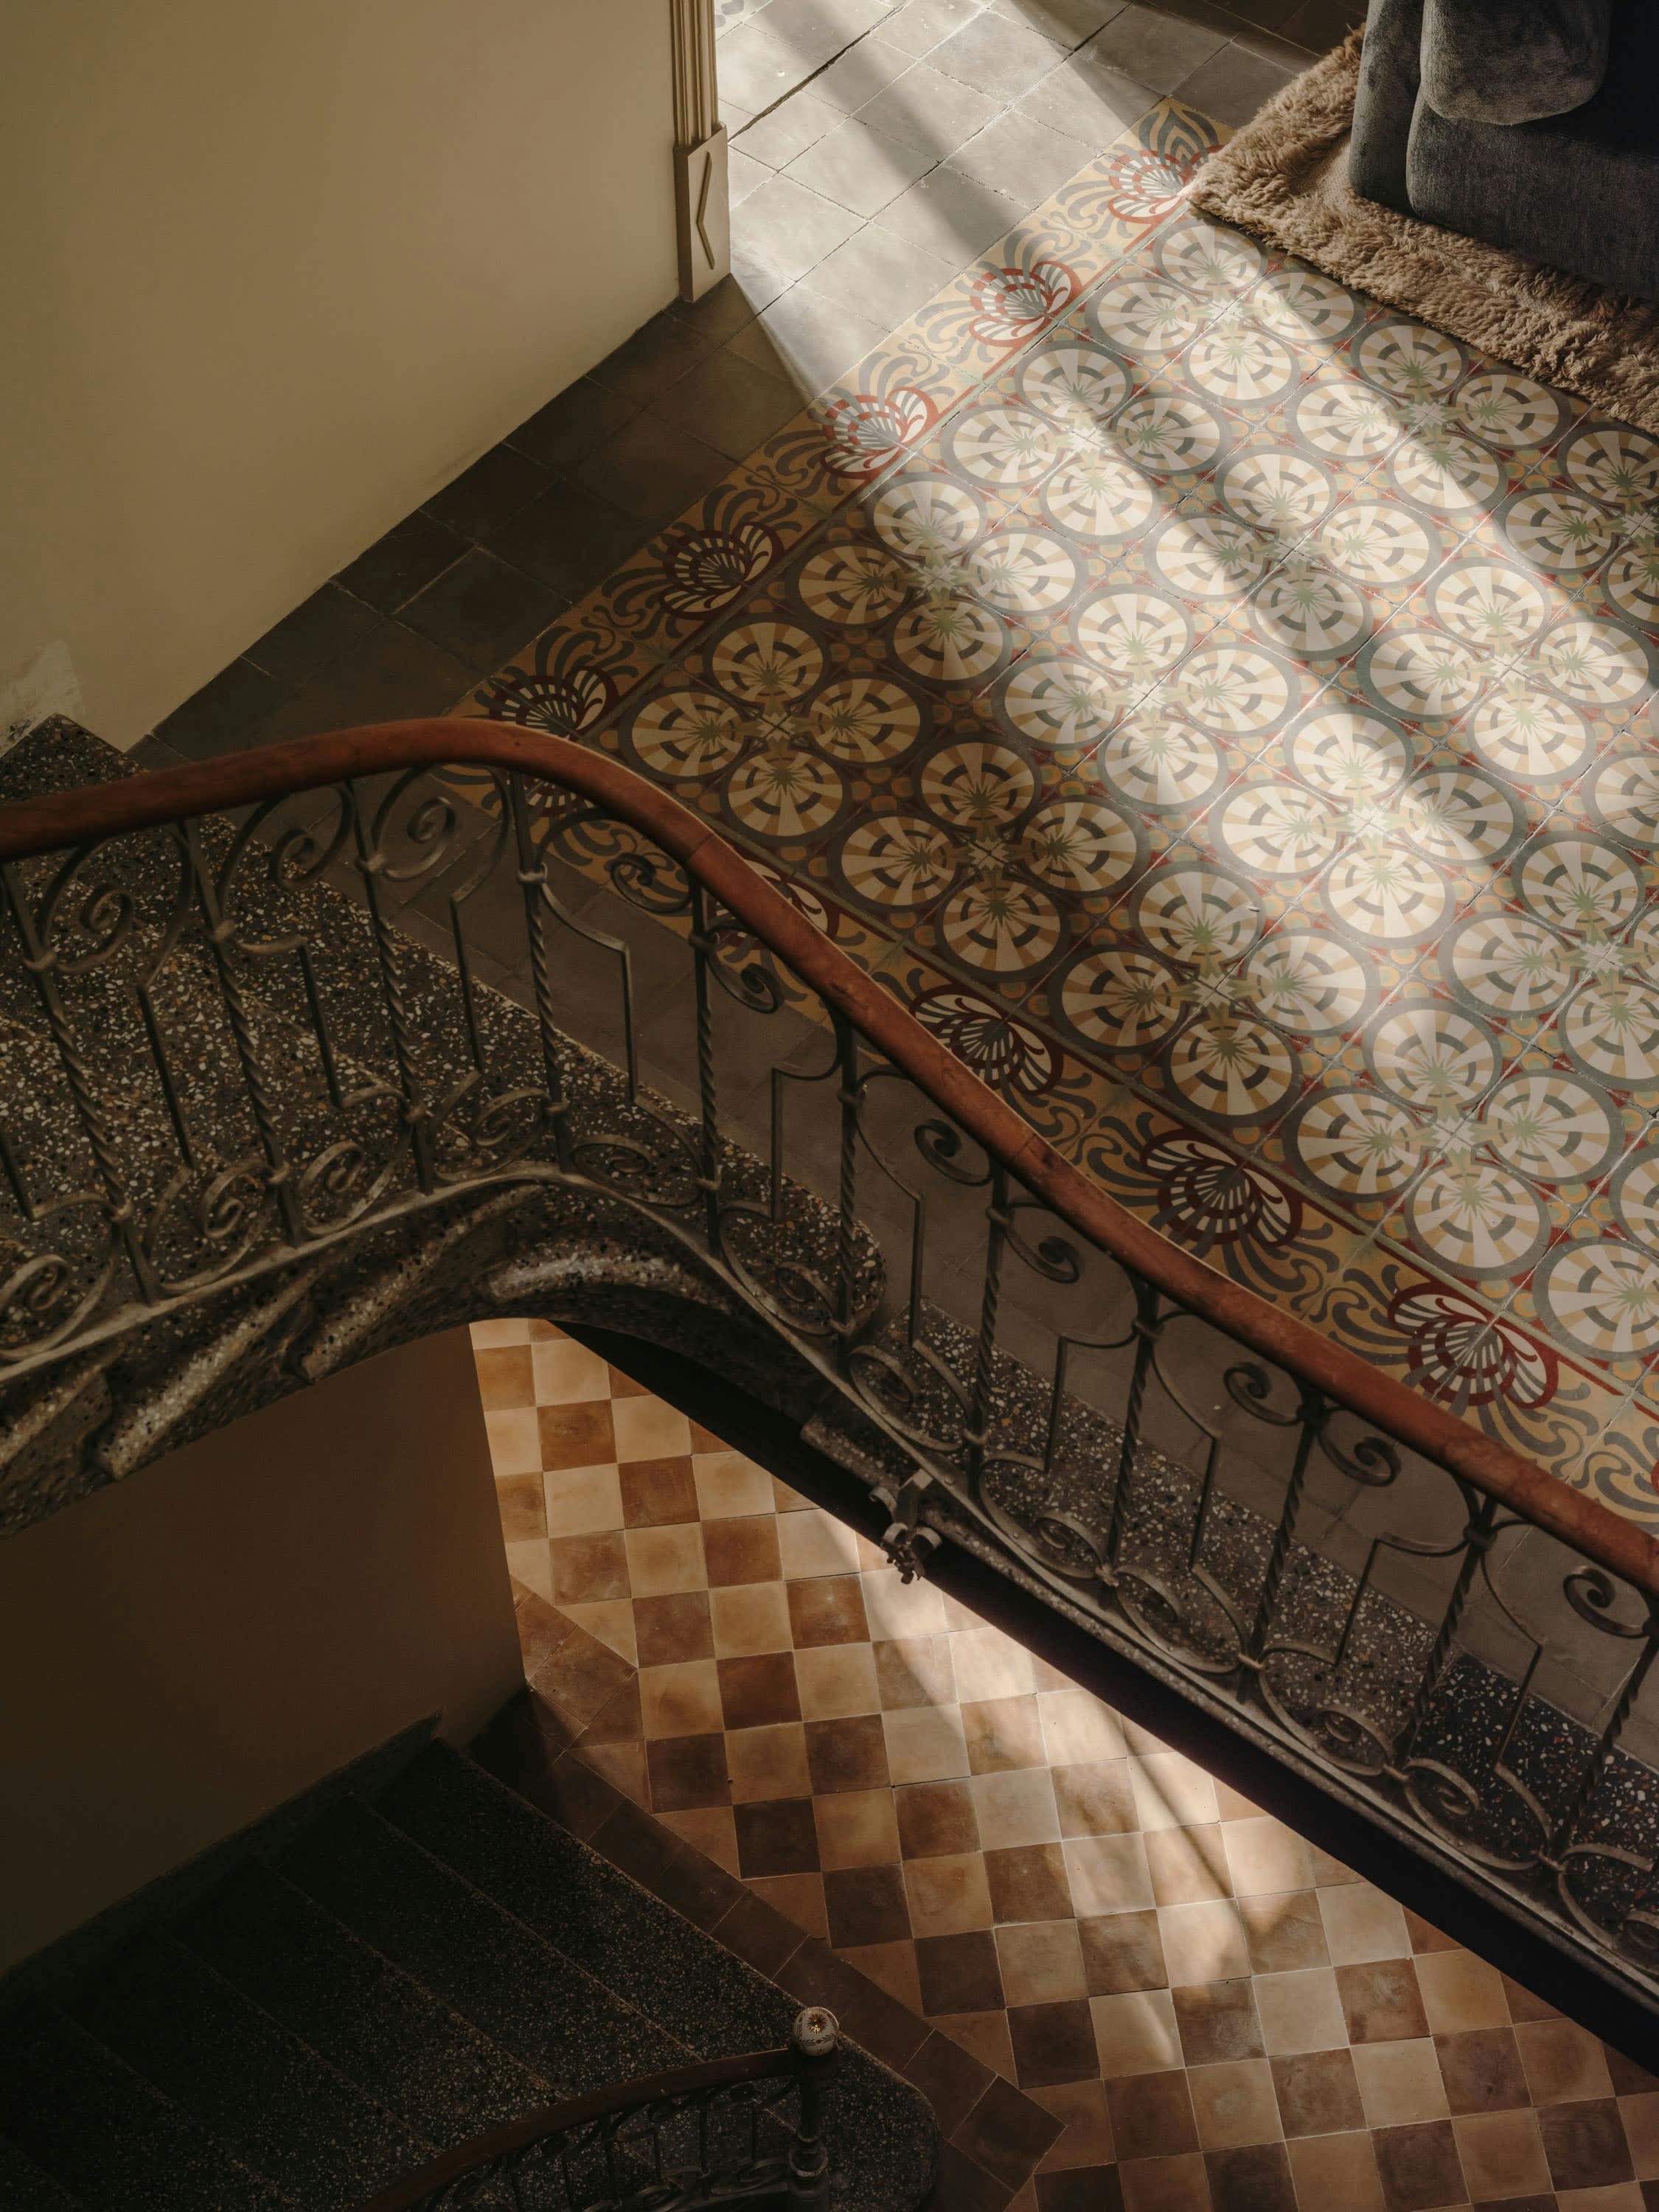 The image features a staircase with a metal railing, which is situated in a room with a tiled floor. The staircase is located in the corner of the room, and the tiled floor is visible in the background. The room appears to be a small space, possibly a bedroom or a small living area.

The staircase is surrounded by a beautifully designed tiled floor, which adds a touch of elegance and style to the room. The tiled floor is also visible in the background, creating a visually appealing contrast between the staircase and the tiled floor.